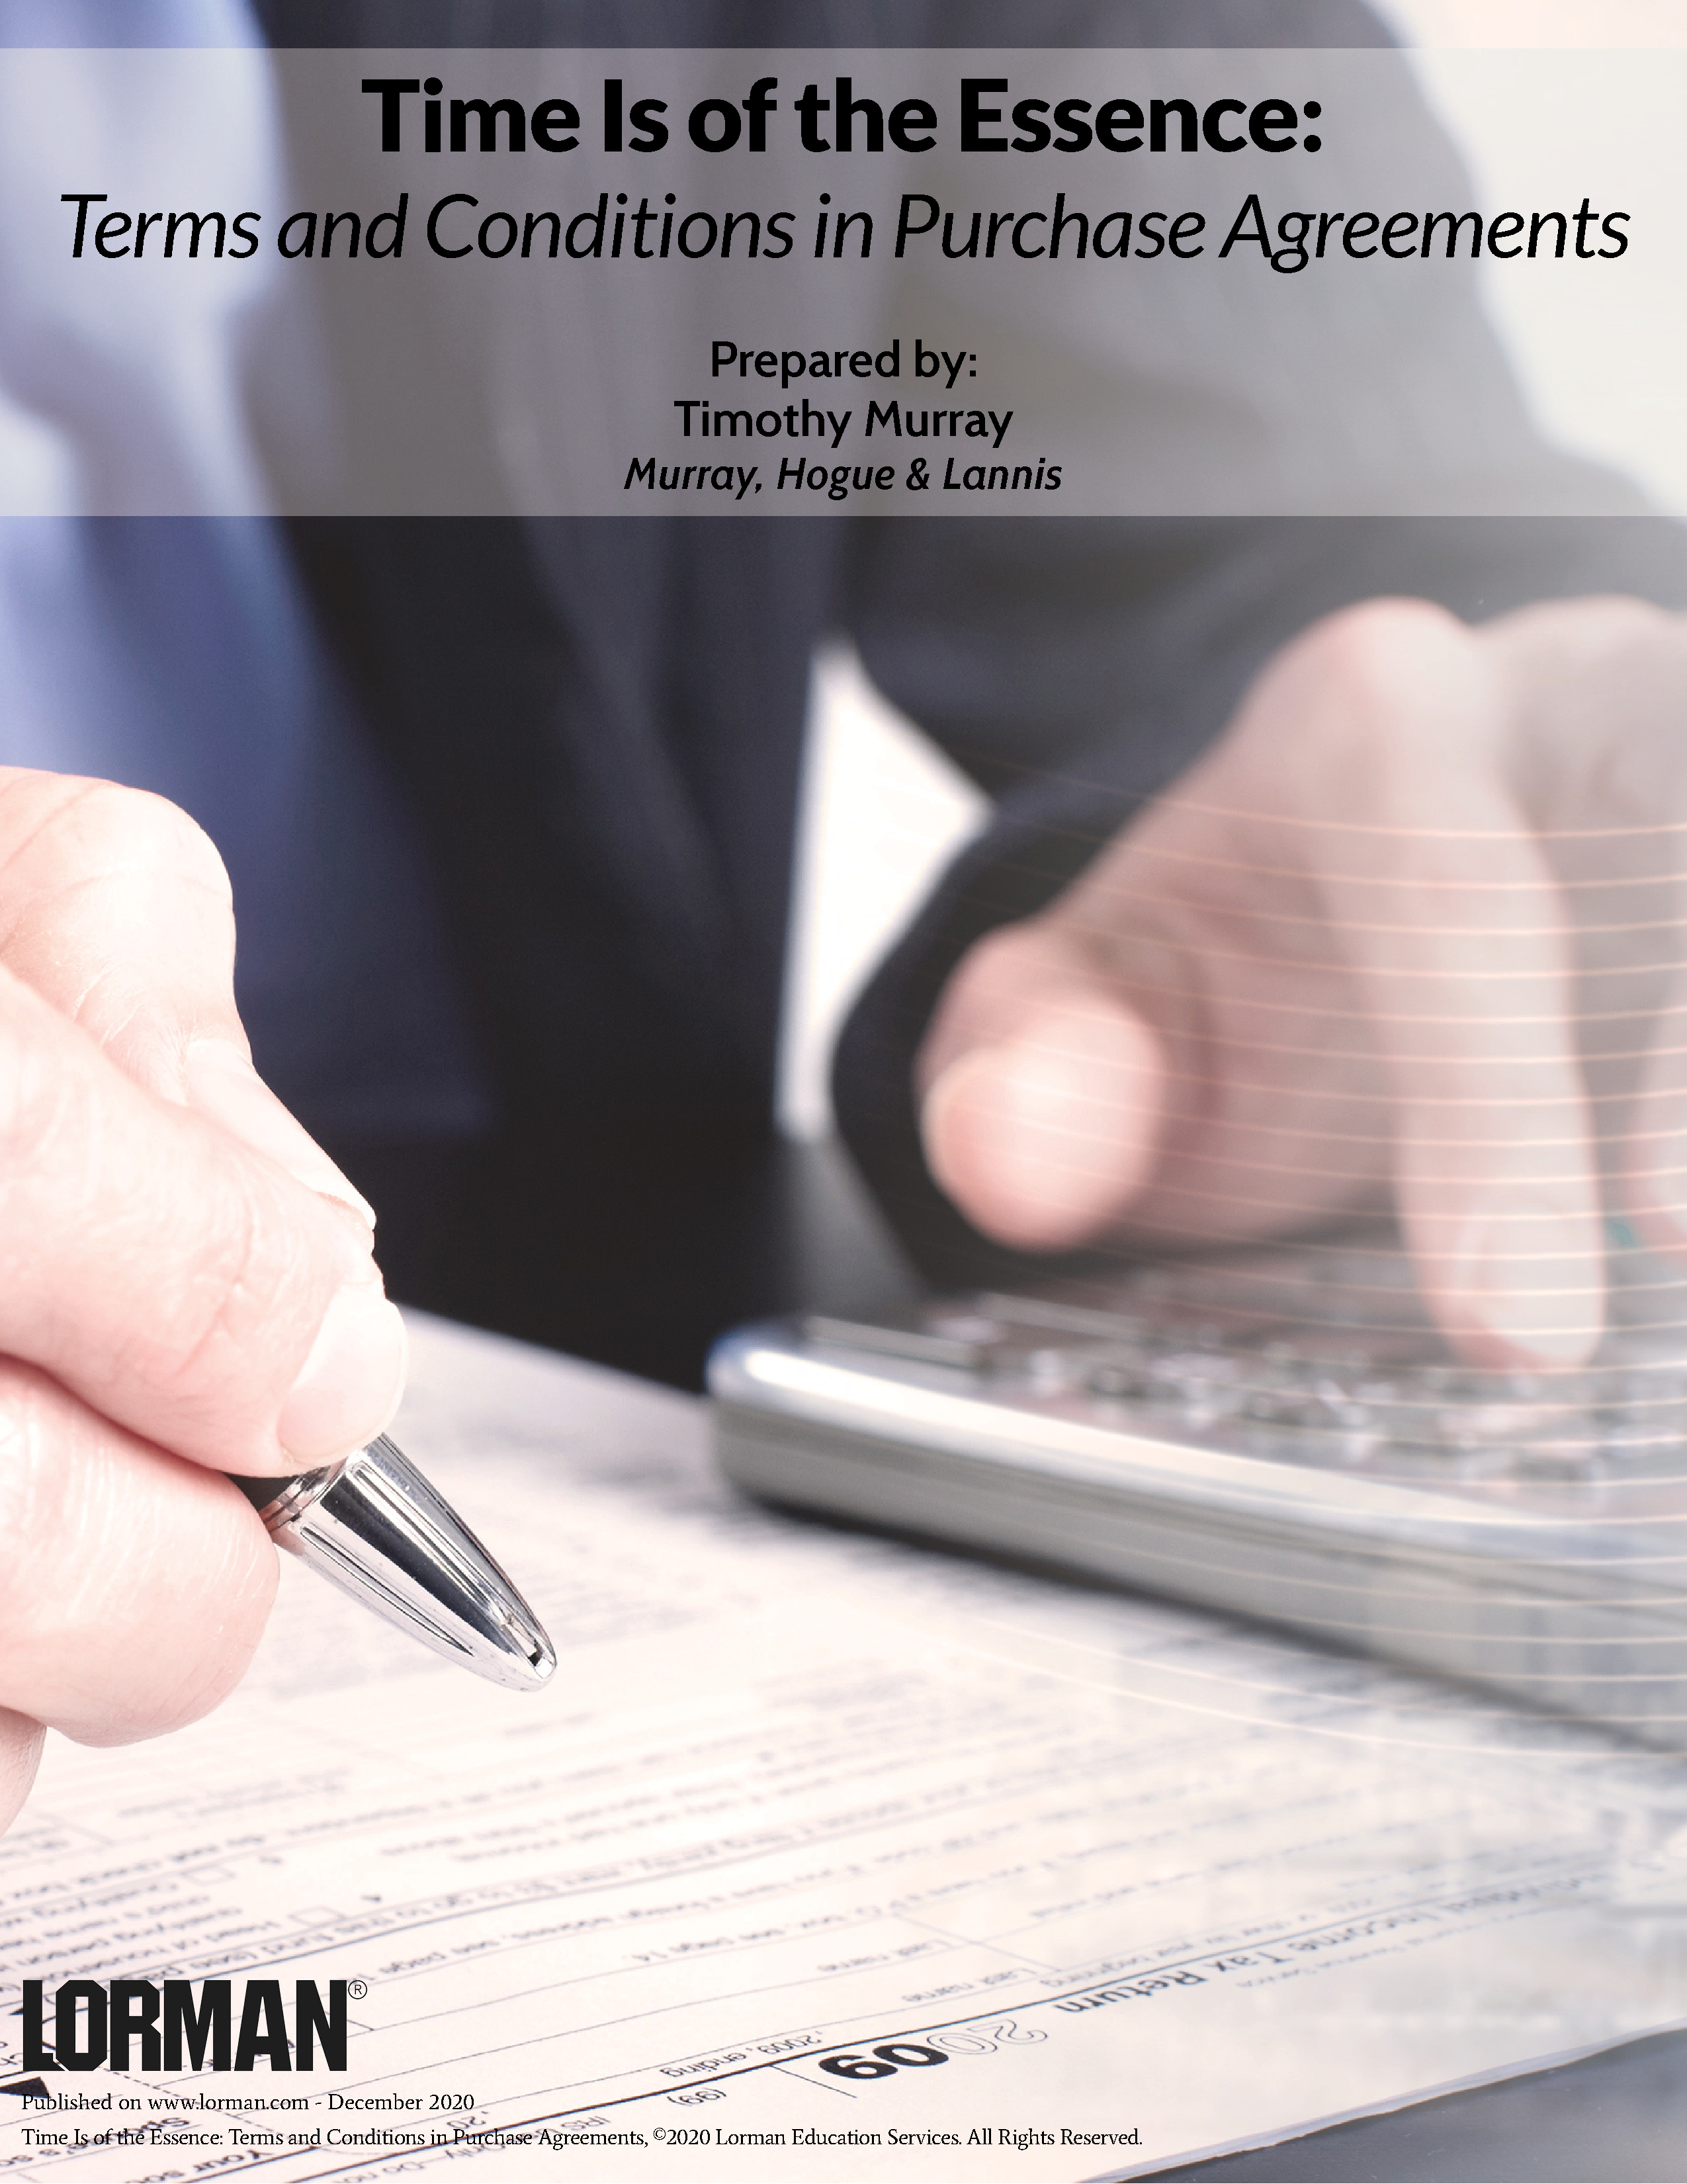 Time Is of the Essence: Terms and Conditions in Purchase Agreements